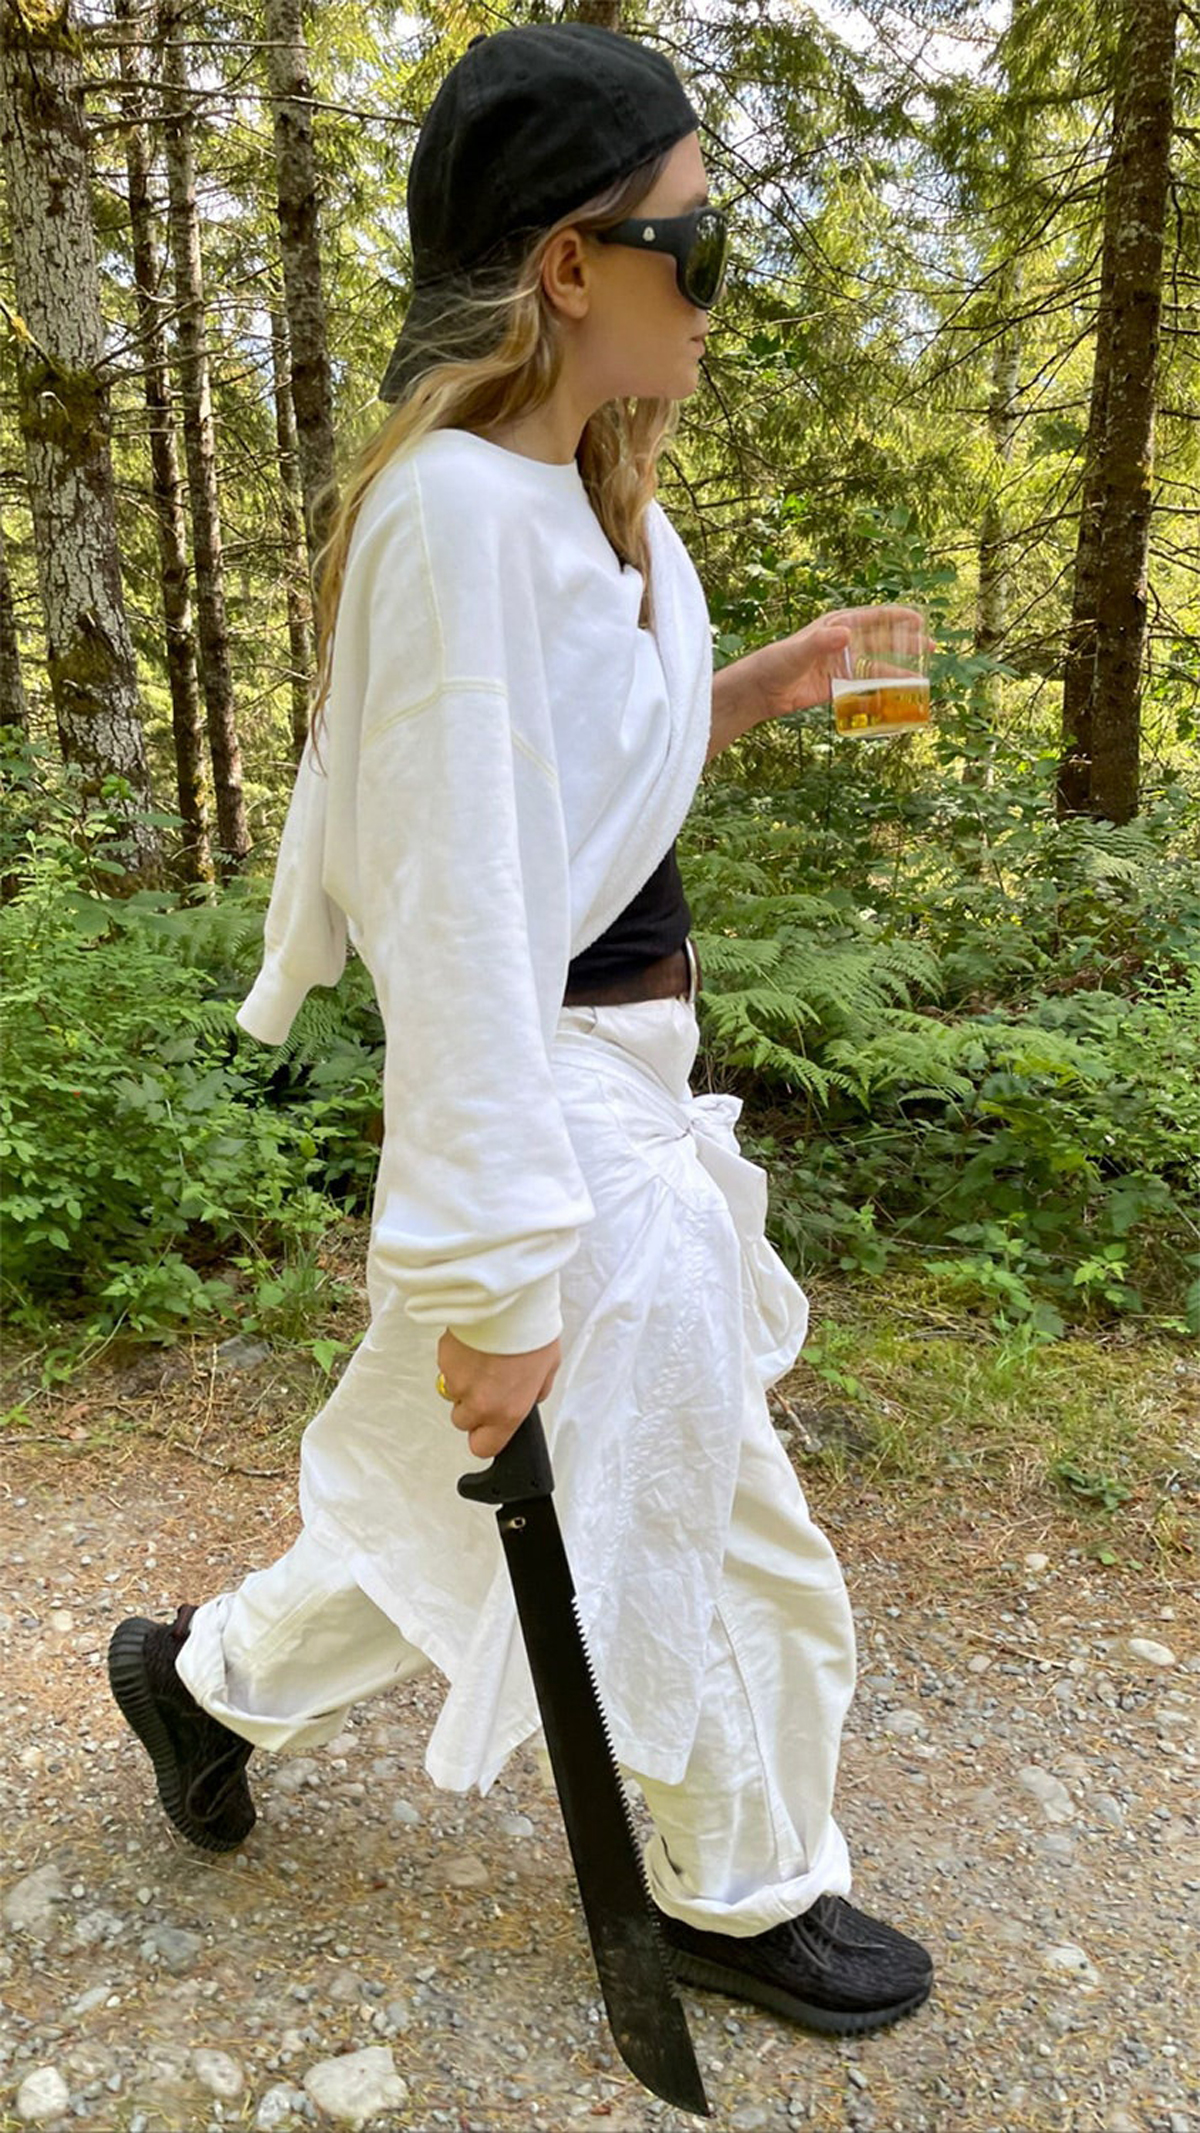 Ashley Olsen Carries Giant Machete On A Hike In Rare Picture From Her Boyfriend Louis Eisner